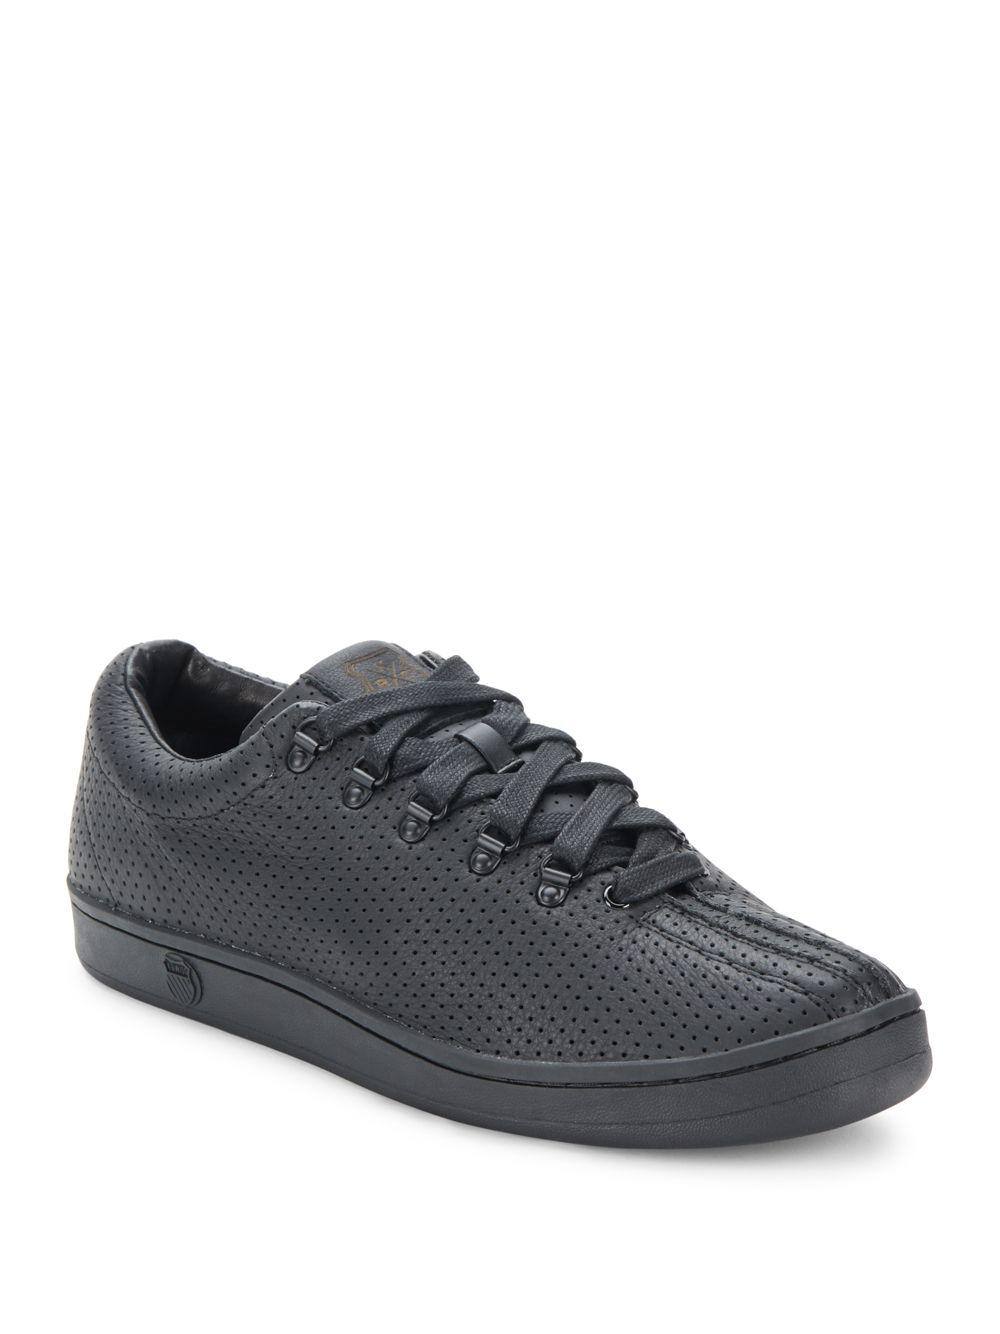 K-swiss Perforated Leather Sneakers in Black for Men | Lyst